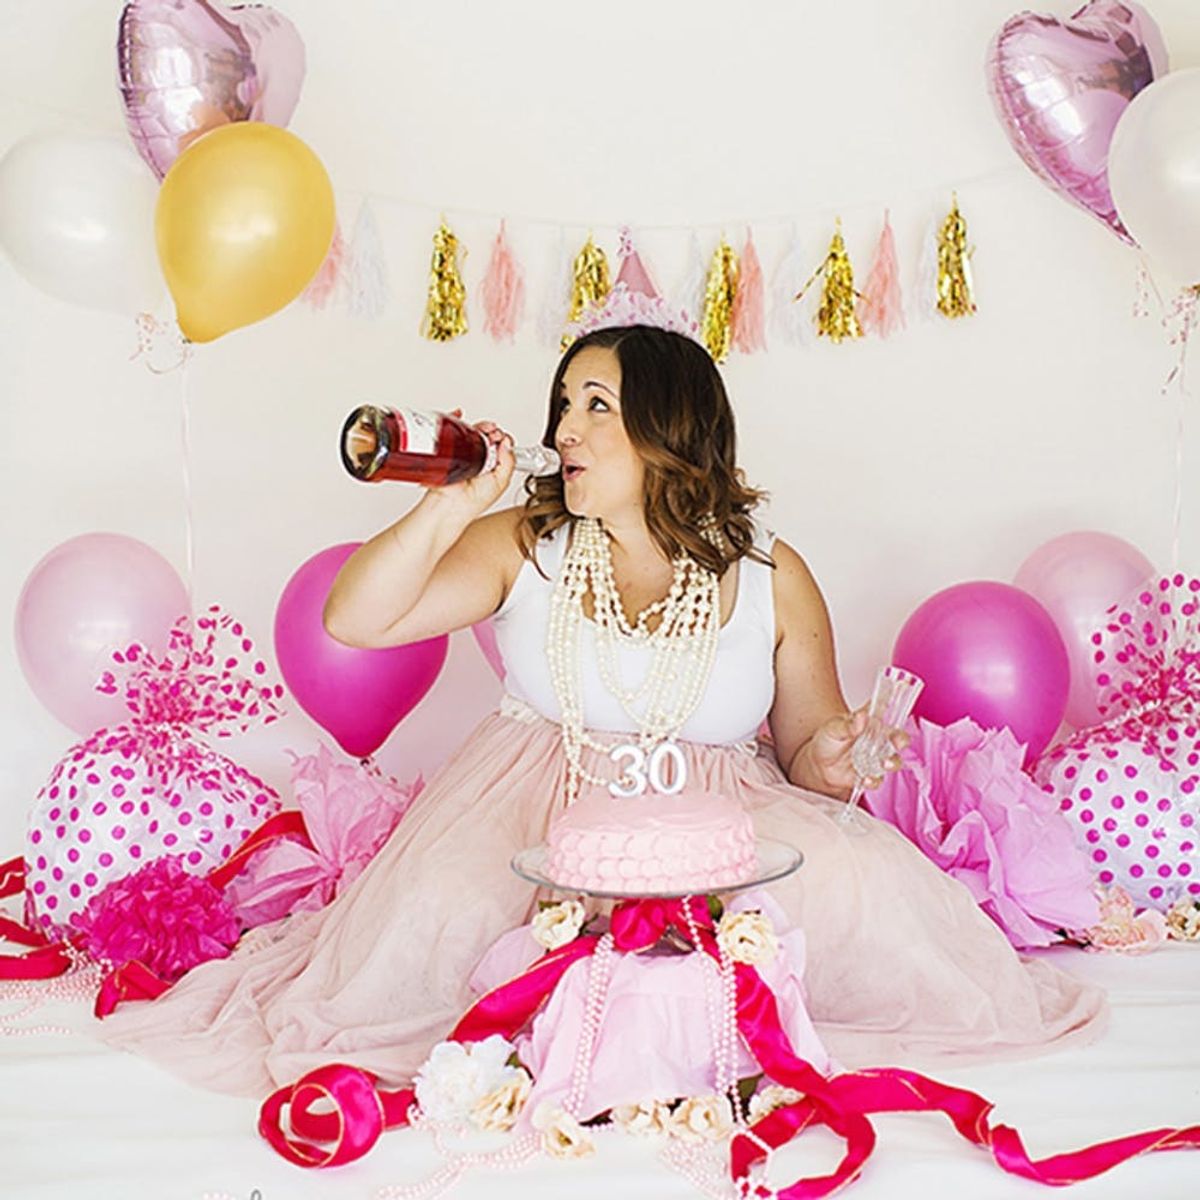 Everything You Need for a 30th Birthday Princess Party